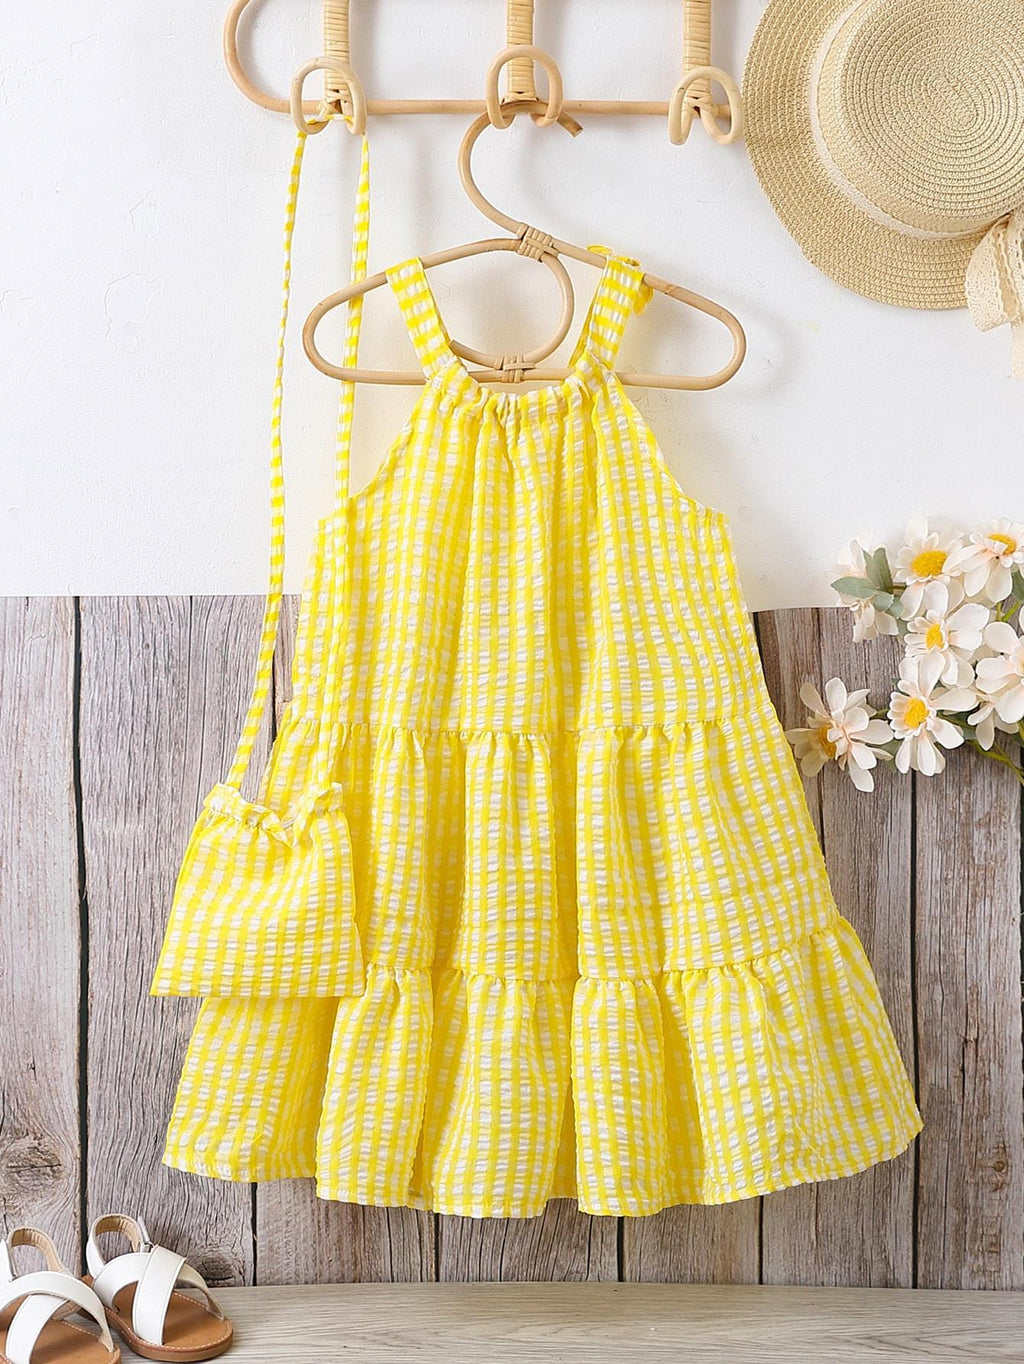 2023 Summer New Girls' Dress Off The Shoulder Hanging Neck Simple Solid Beach Holiday Dress Wholesale